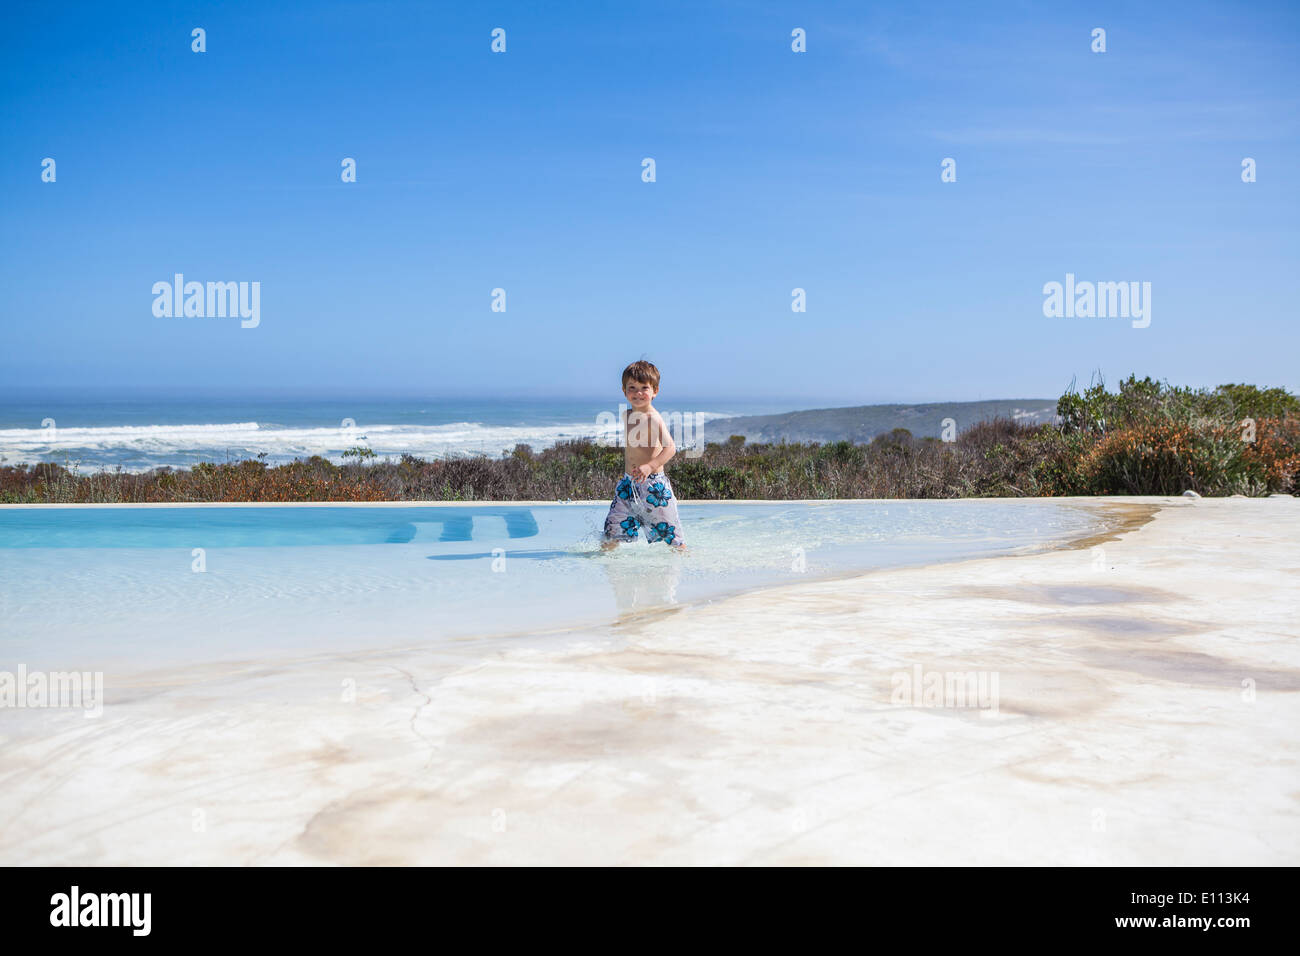 Young boy riding a red scooter in board shorts, on a white surface, infinity rim swimming pool and ocean in the background Stock Photo